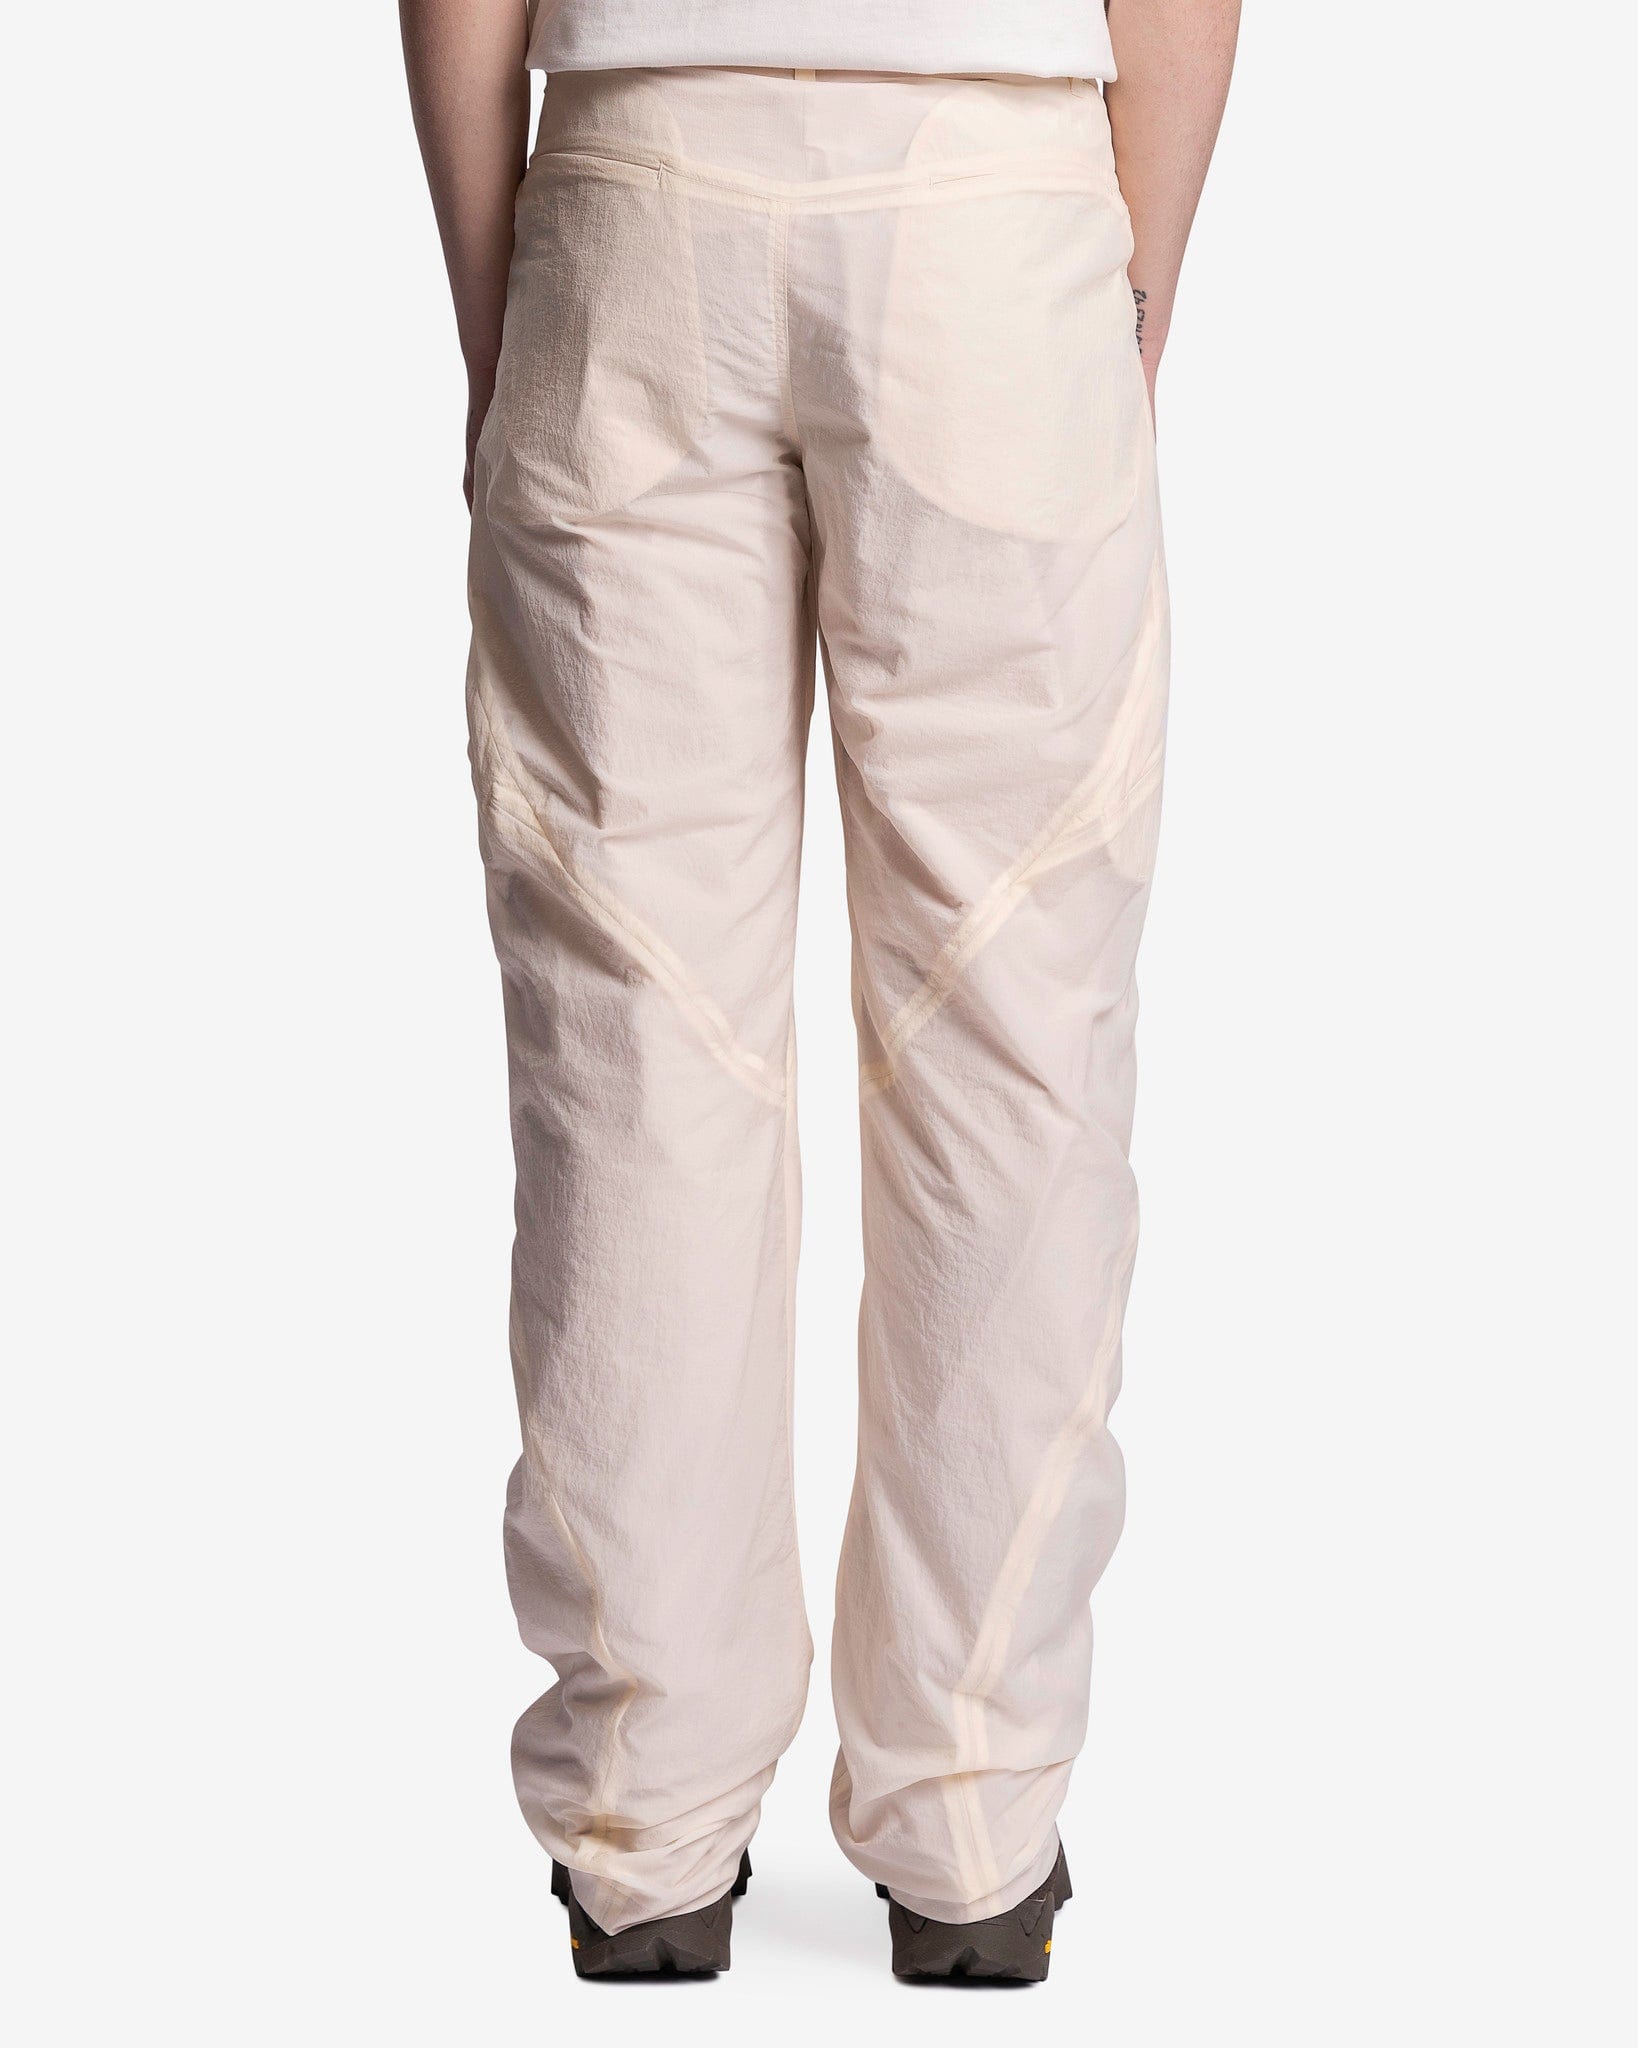 POST ARCHIVE FACTION (P.A.F) Men's Pants 5.0+ Trousers Center in Ivory/White